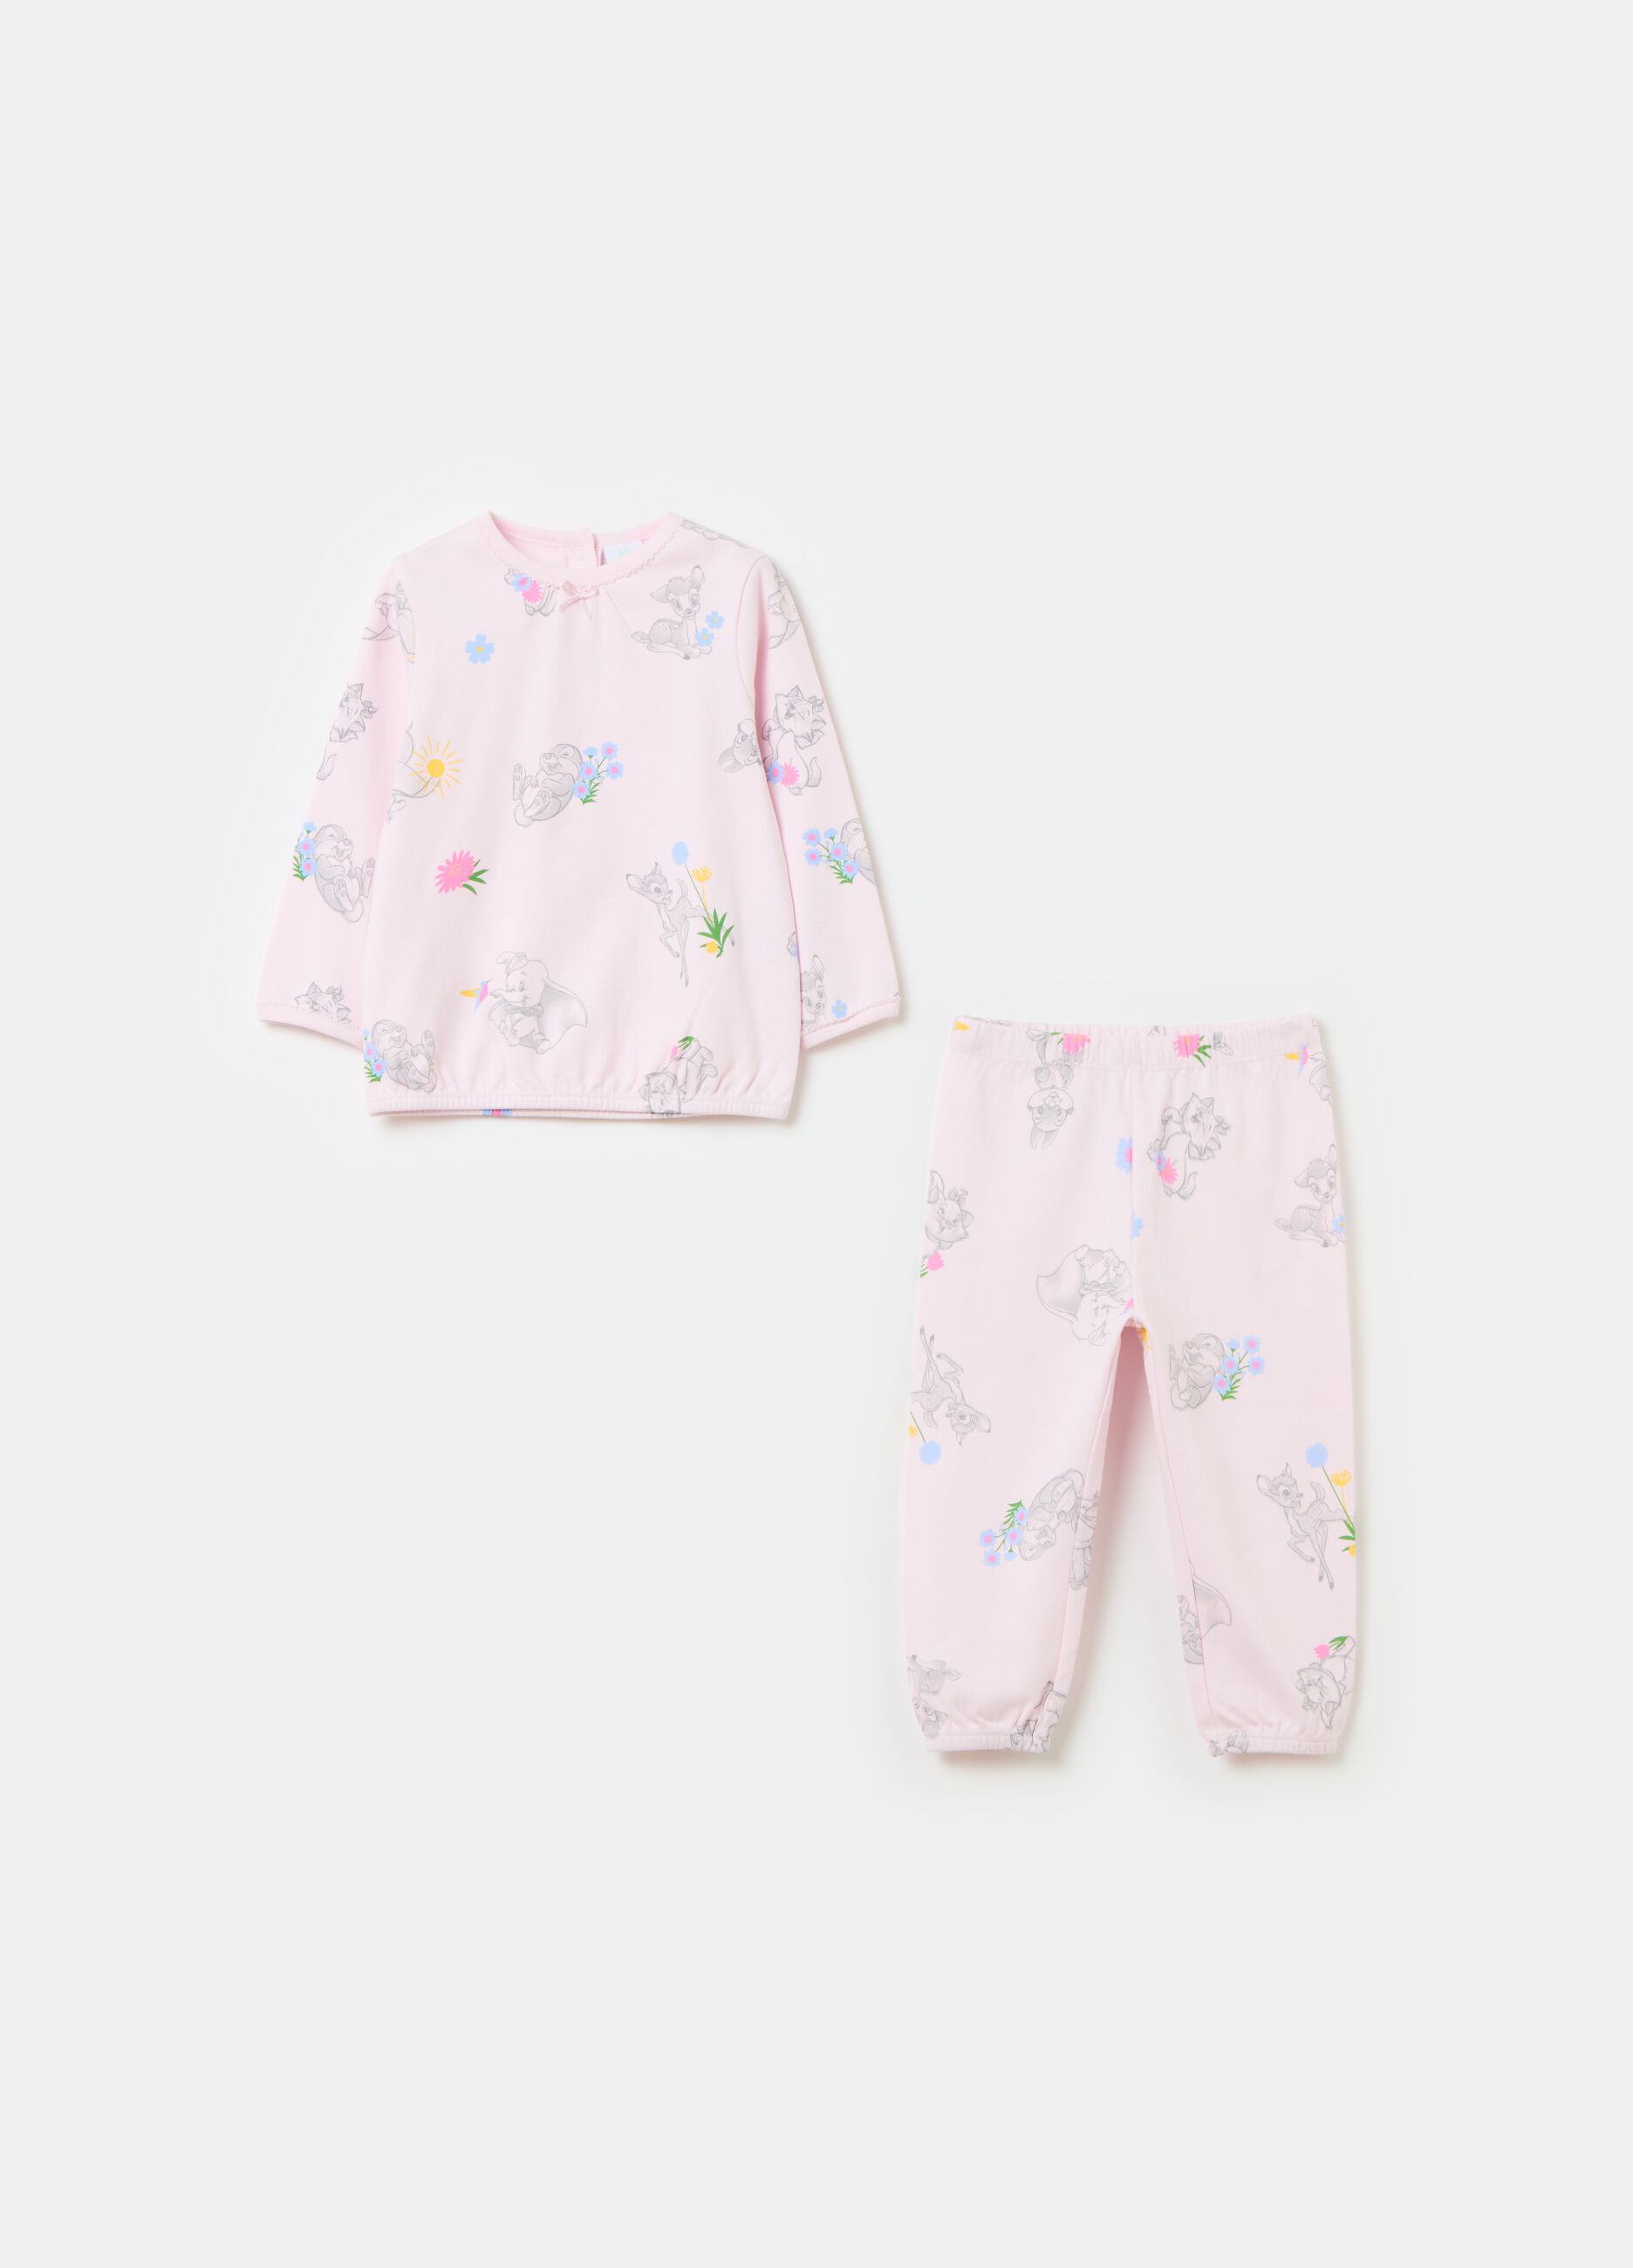 Marie and Thumper pyjamas in organic cotton